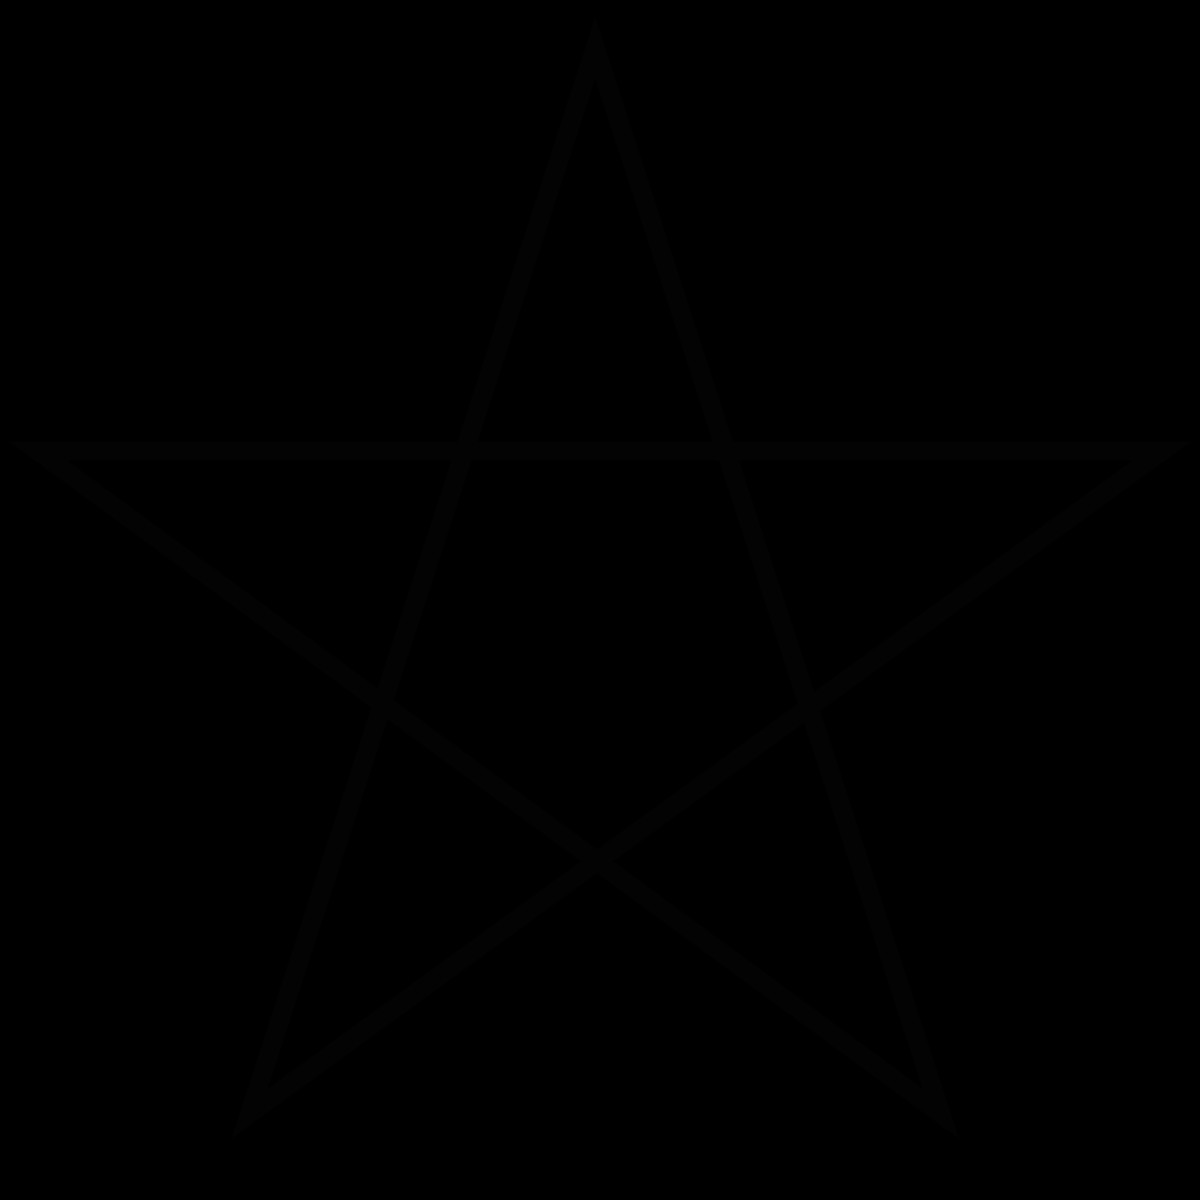 Drawing 9 Pointed Star Star Polygon Wikipedia